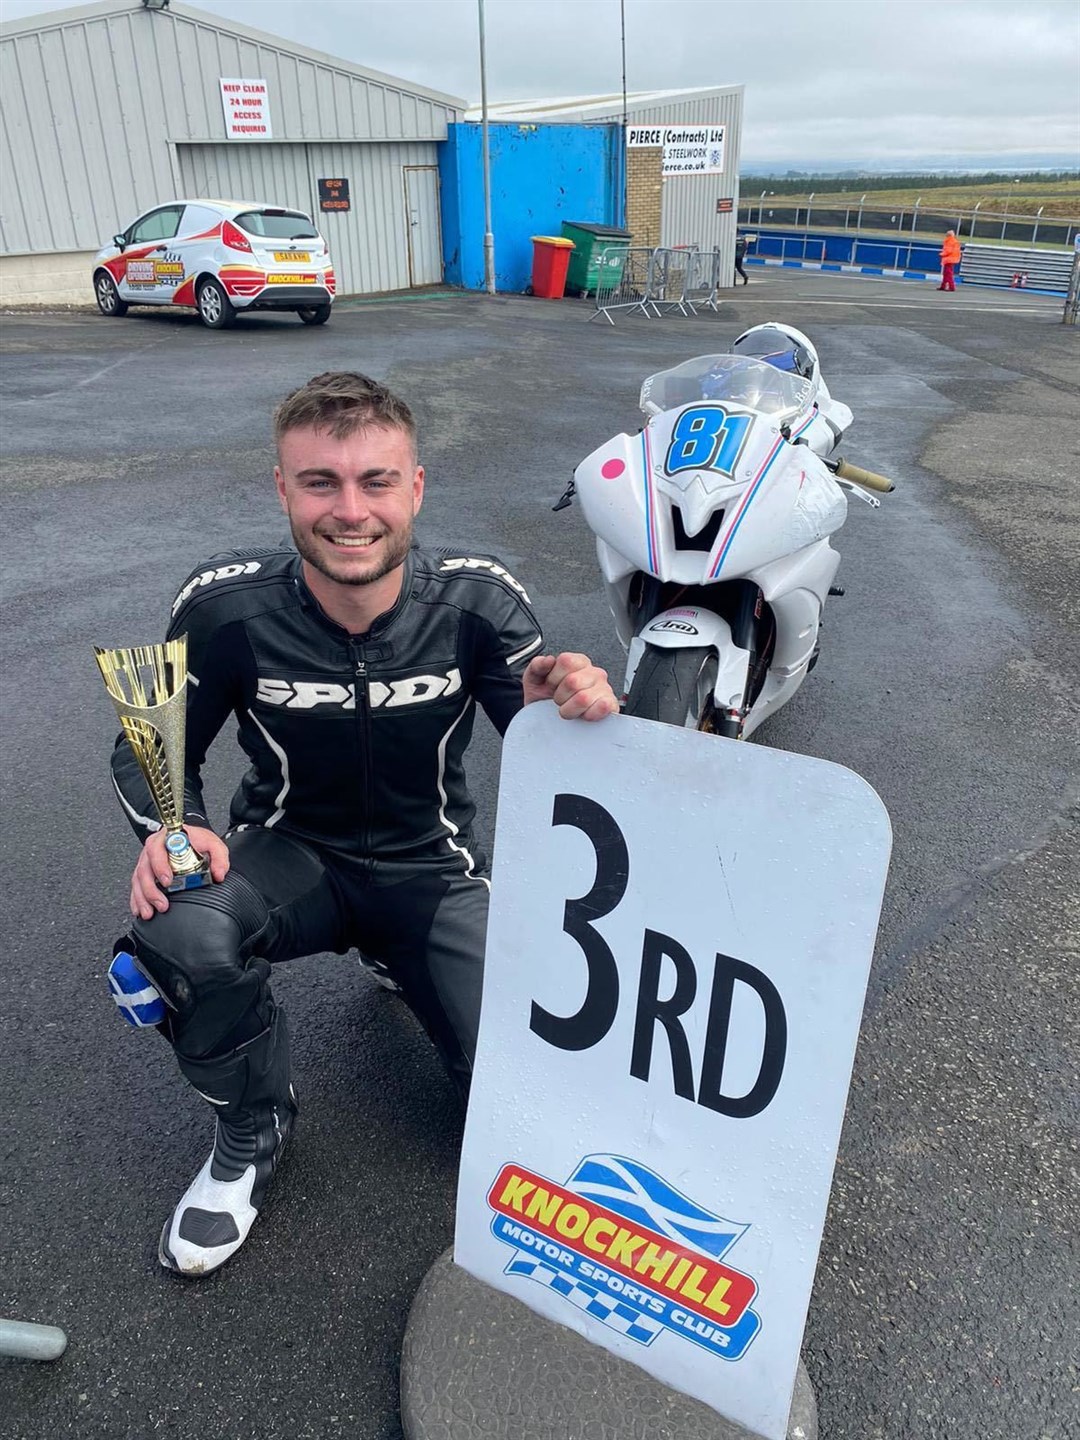 Callum Bey was third in the Scottish Championships on his debut on a 600cc bike.